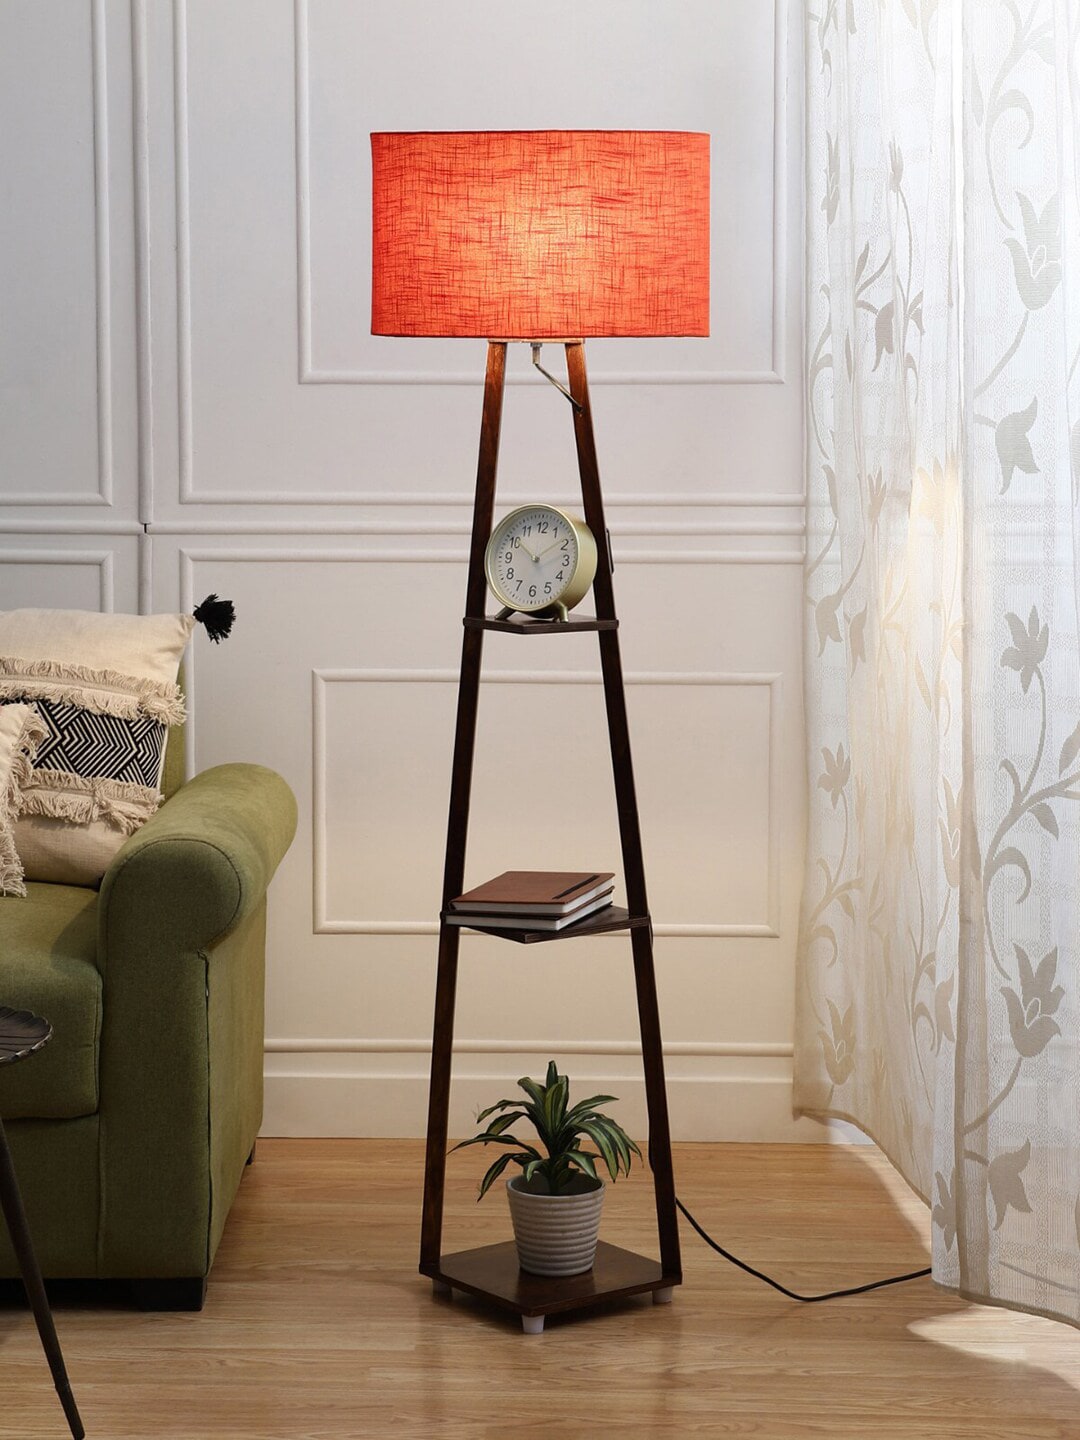 SANDED EDGE Rust 3 Tier Shelf Space Cylindrical Contemporary Floor Lamp Price in India